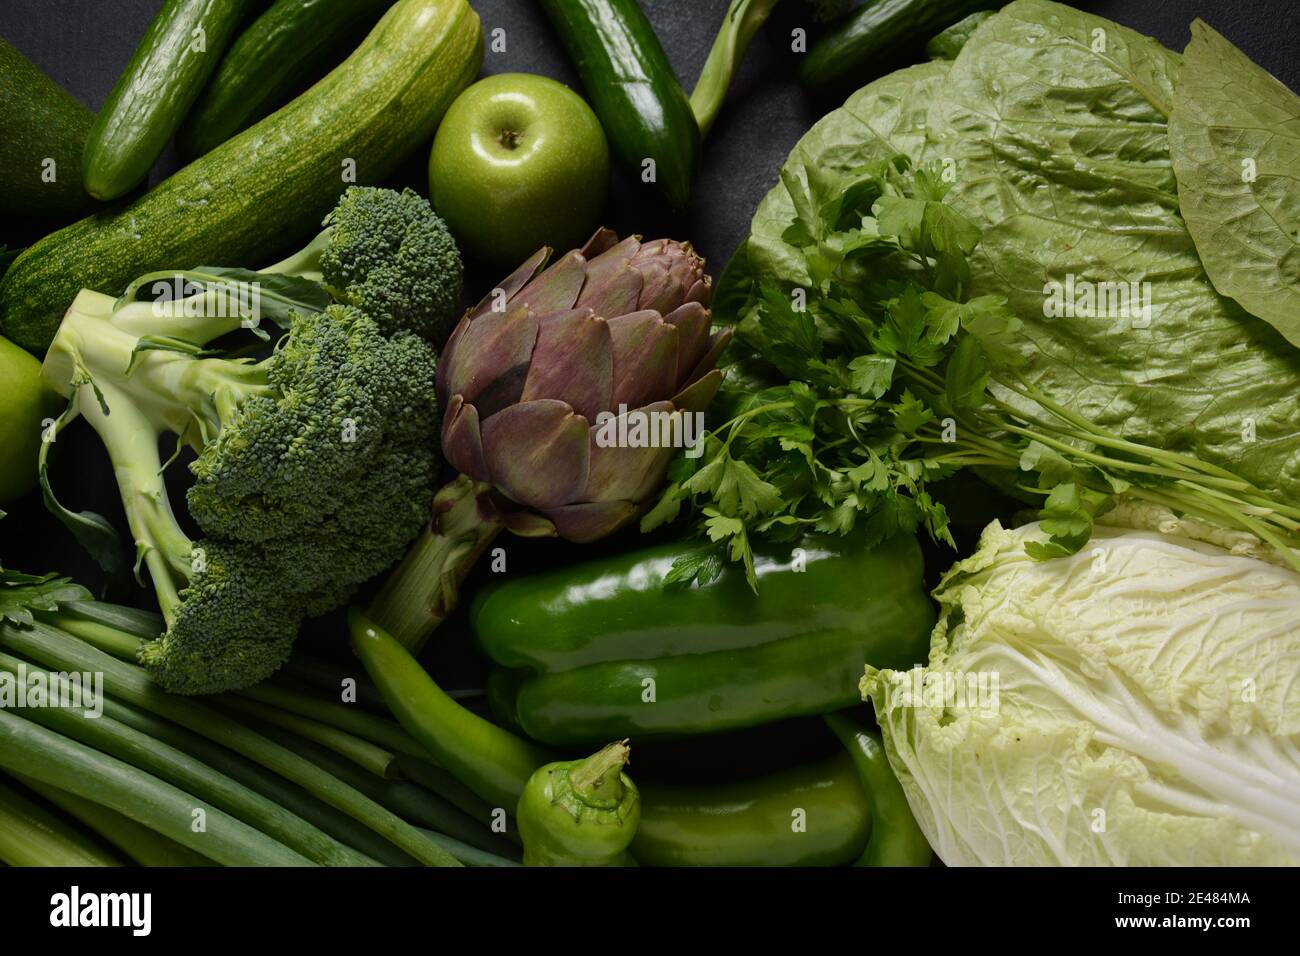 Assortment of fresh fruits and vegetables. Healthy food background ...